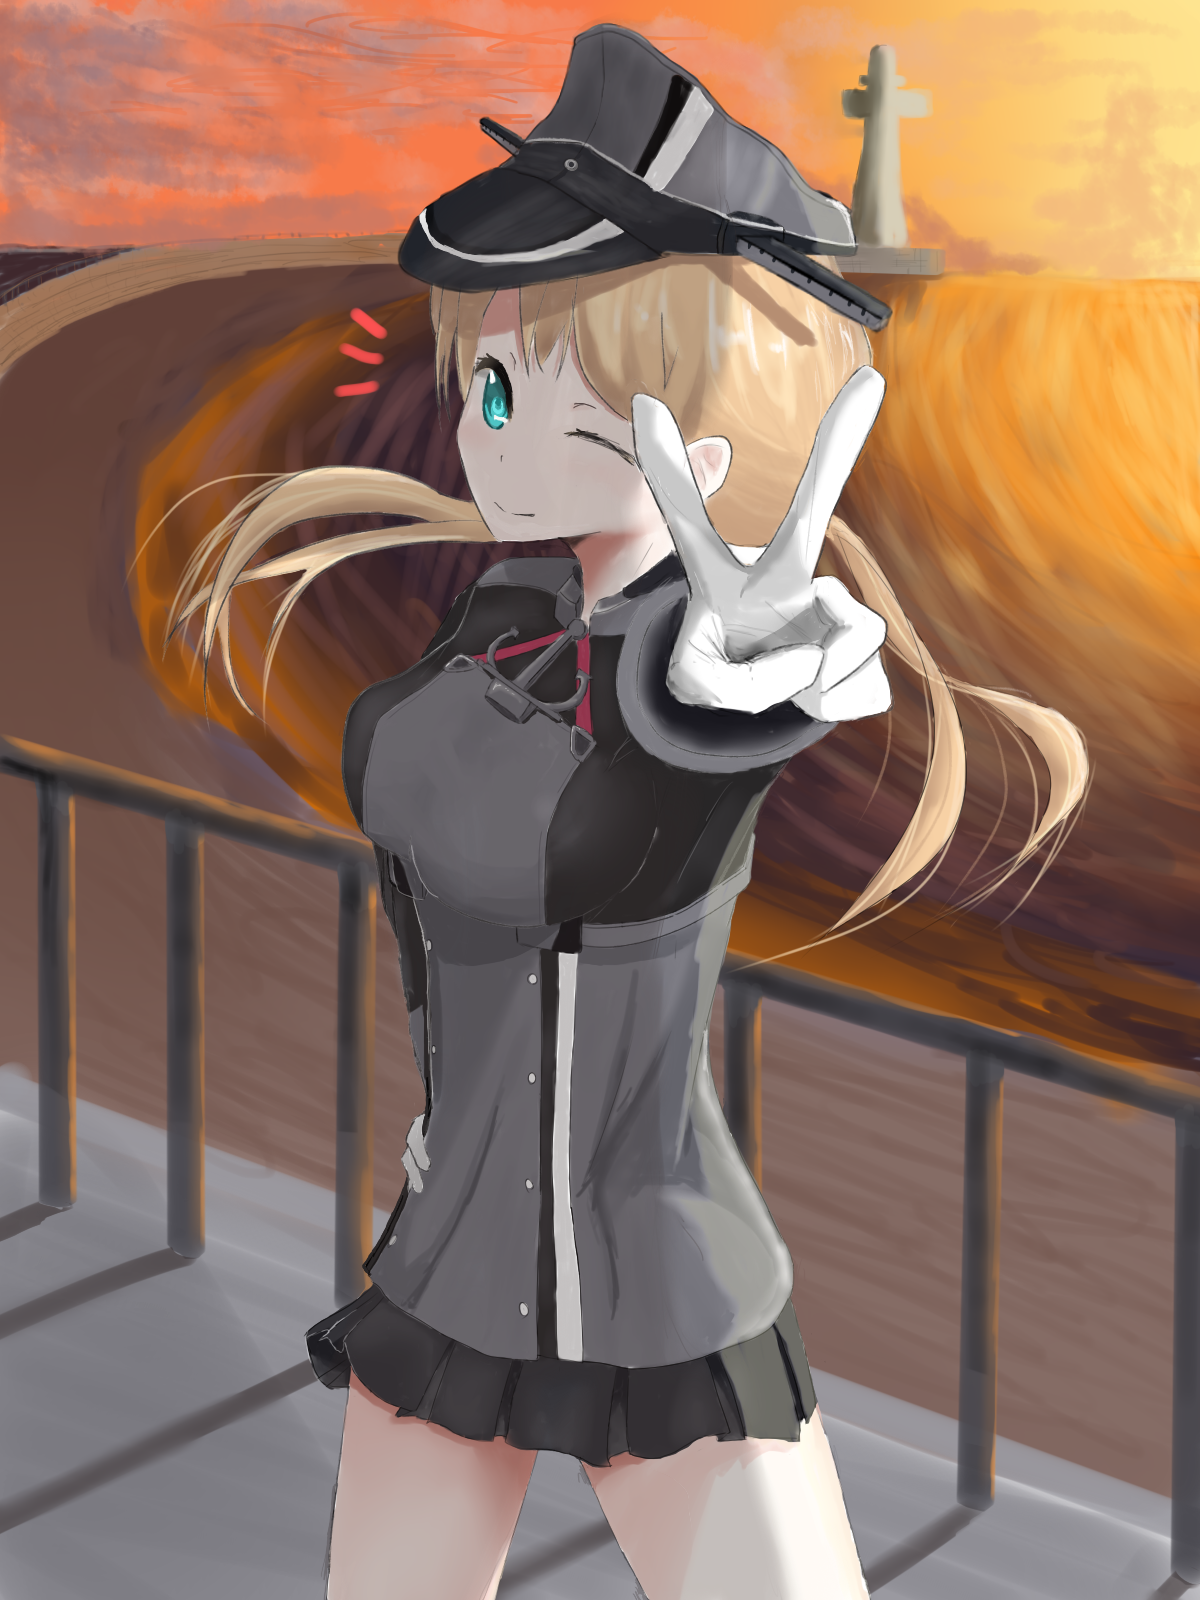 Anime 1200x1600 anime anime girls Kantai Collection Prinz Eugen (KanColle) twintails blonde solo artwork digital art fan art hat peace sign